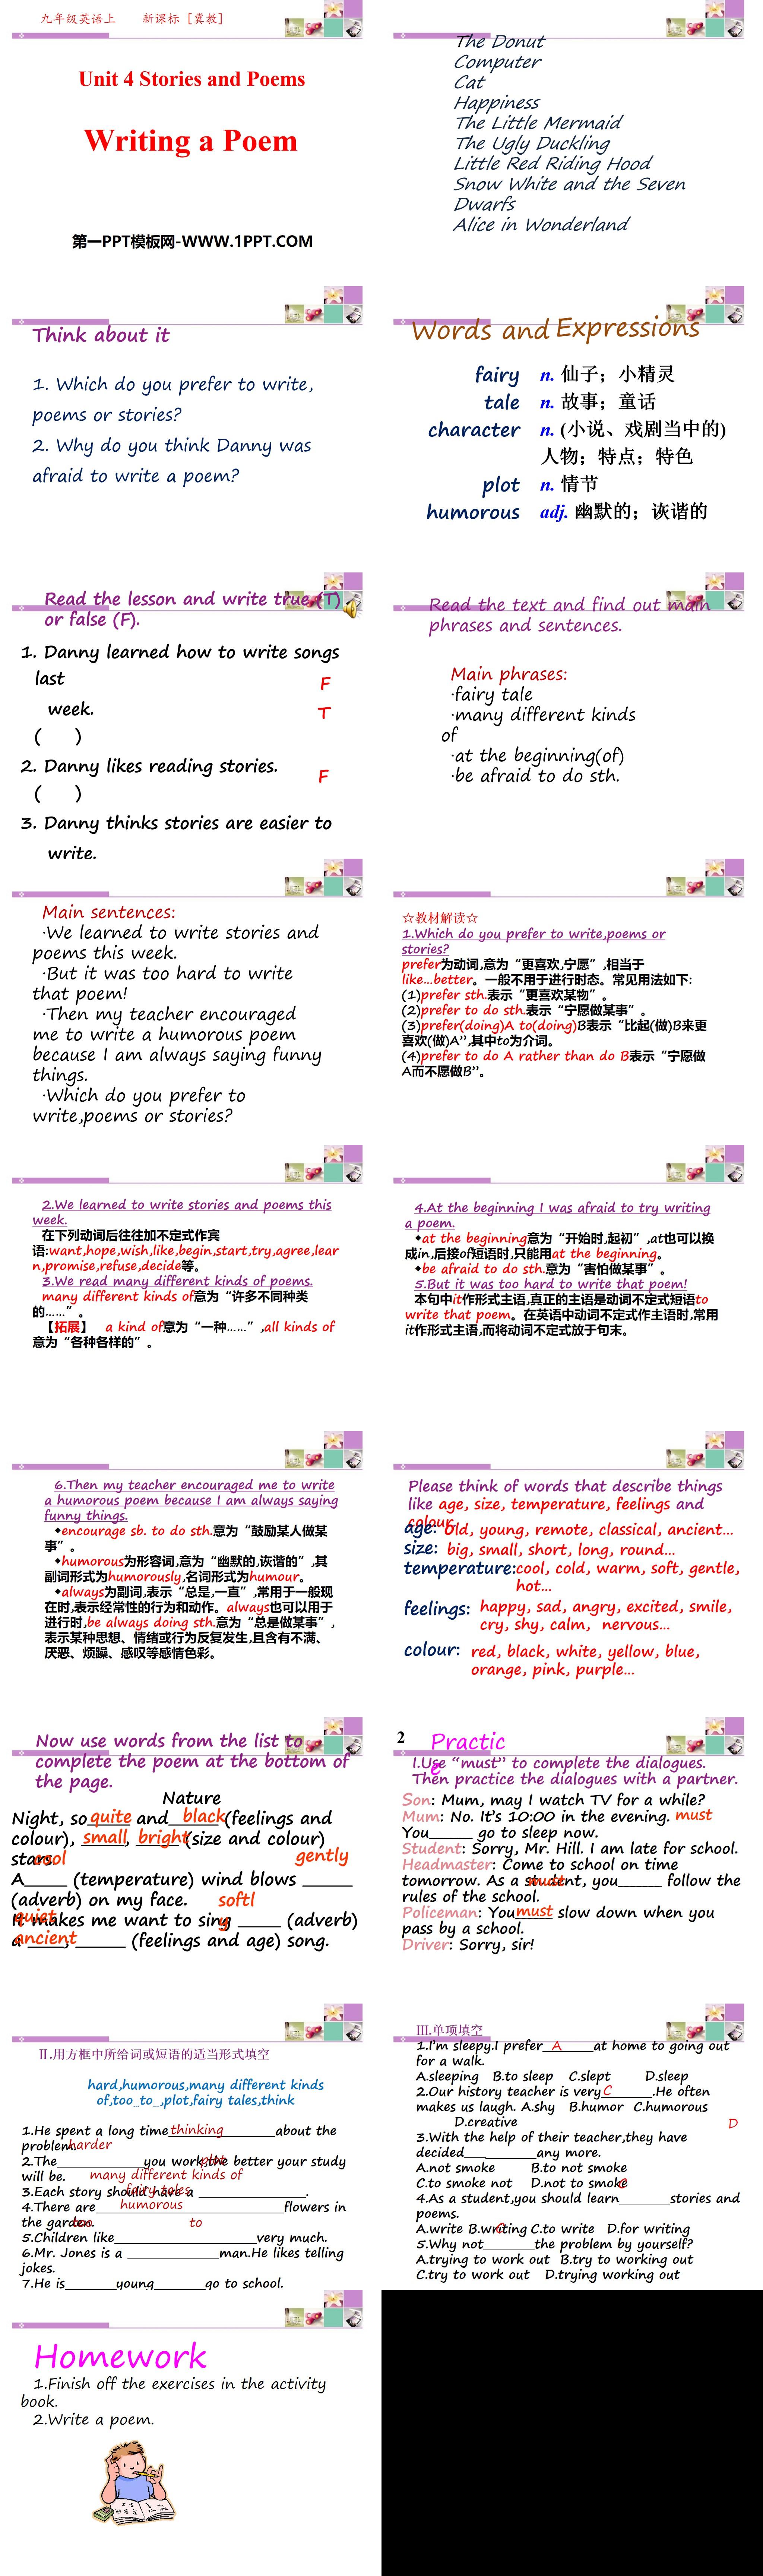 《Writing a Poem》Stories and Poems PPT课件
（2）